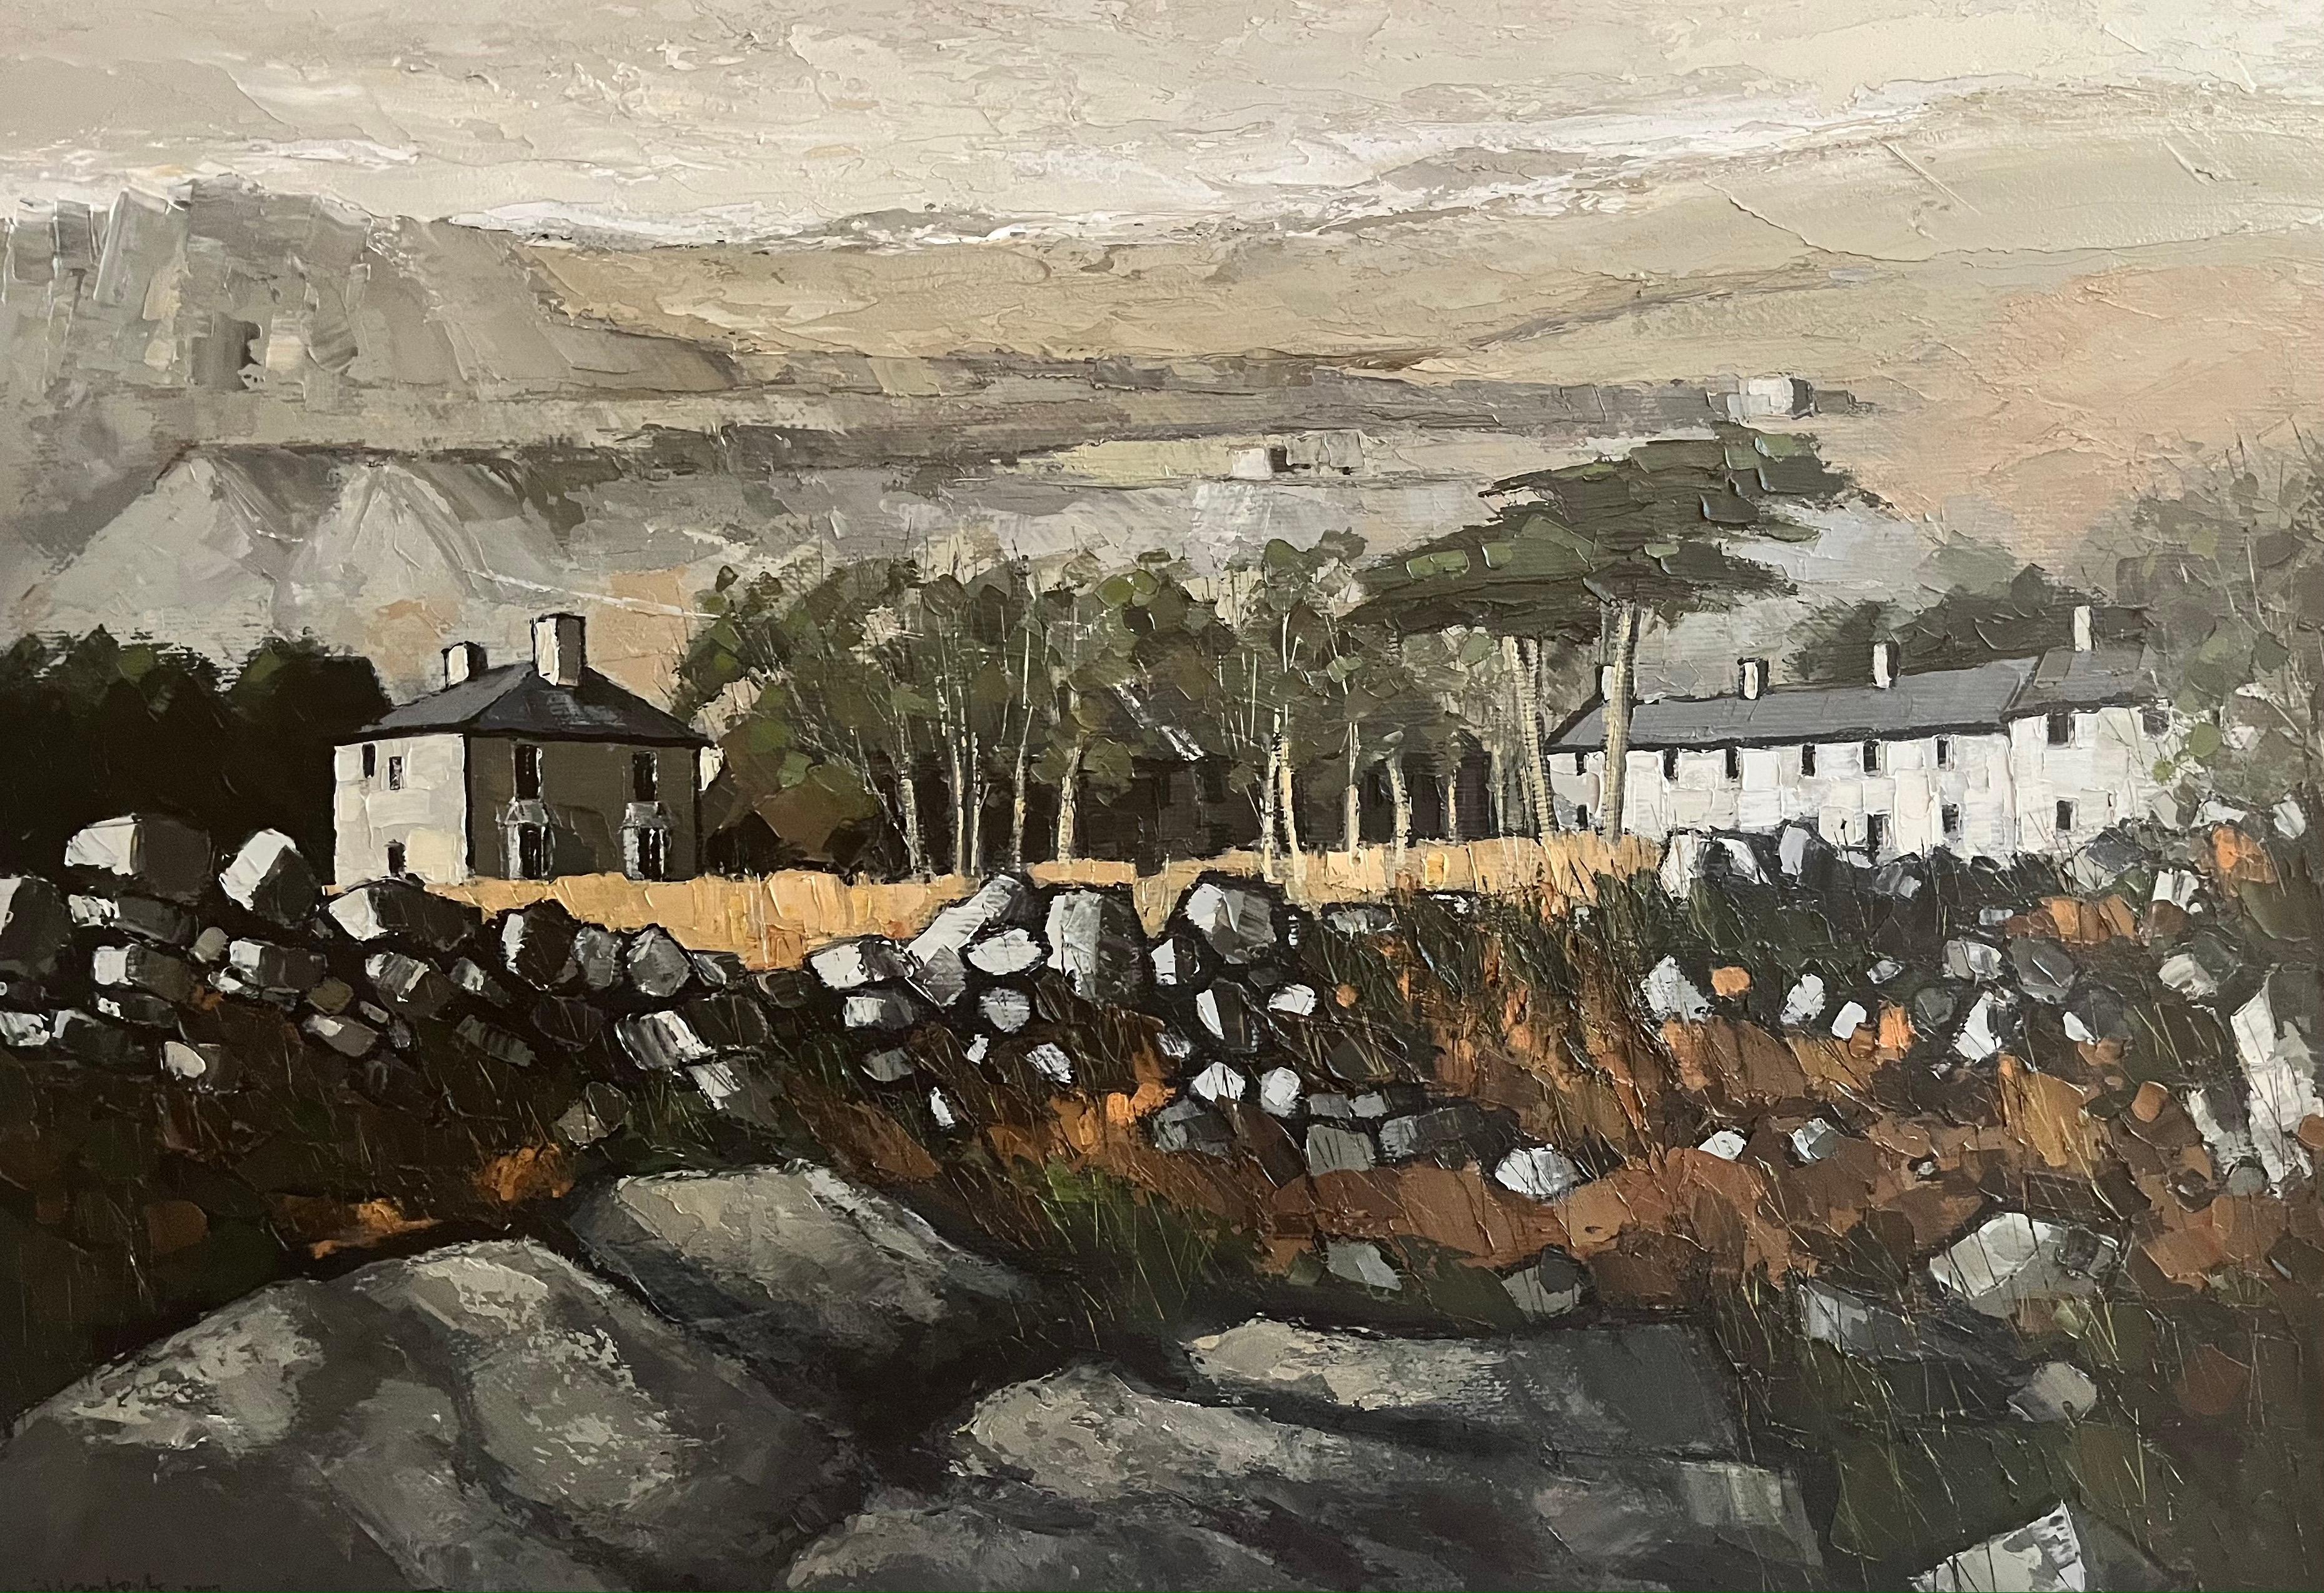 'Nant Gwrtheyrn, Pwllheli' Green Welsh Rural Landscape Painting of cottages, mountains and trees. Thick impasto created a rich and atmospheric work. 
With a rich impasto and organic colour palette you can see Wilf Roberts takes great inspiration